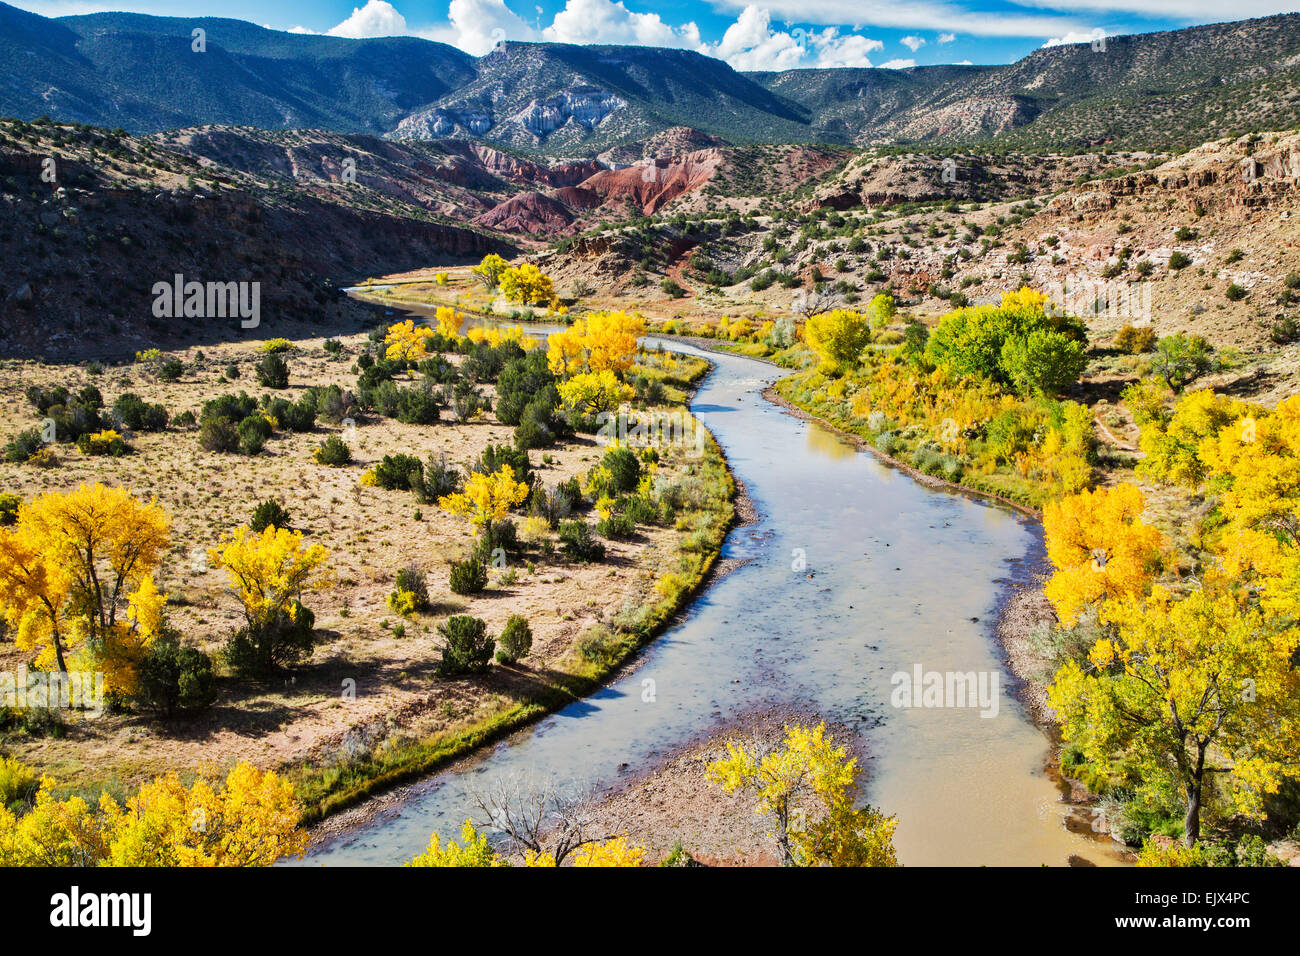 The Chama River flows through the vilage of Abiquiu in northern New Mexico and is near both Pedernal peak and Ghost Ranch. Stock Photo